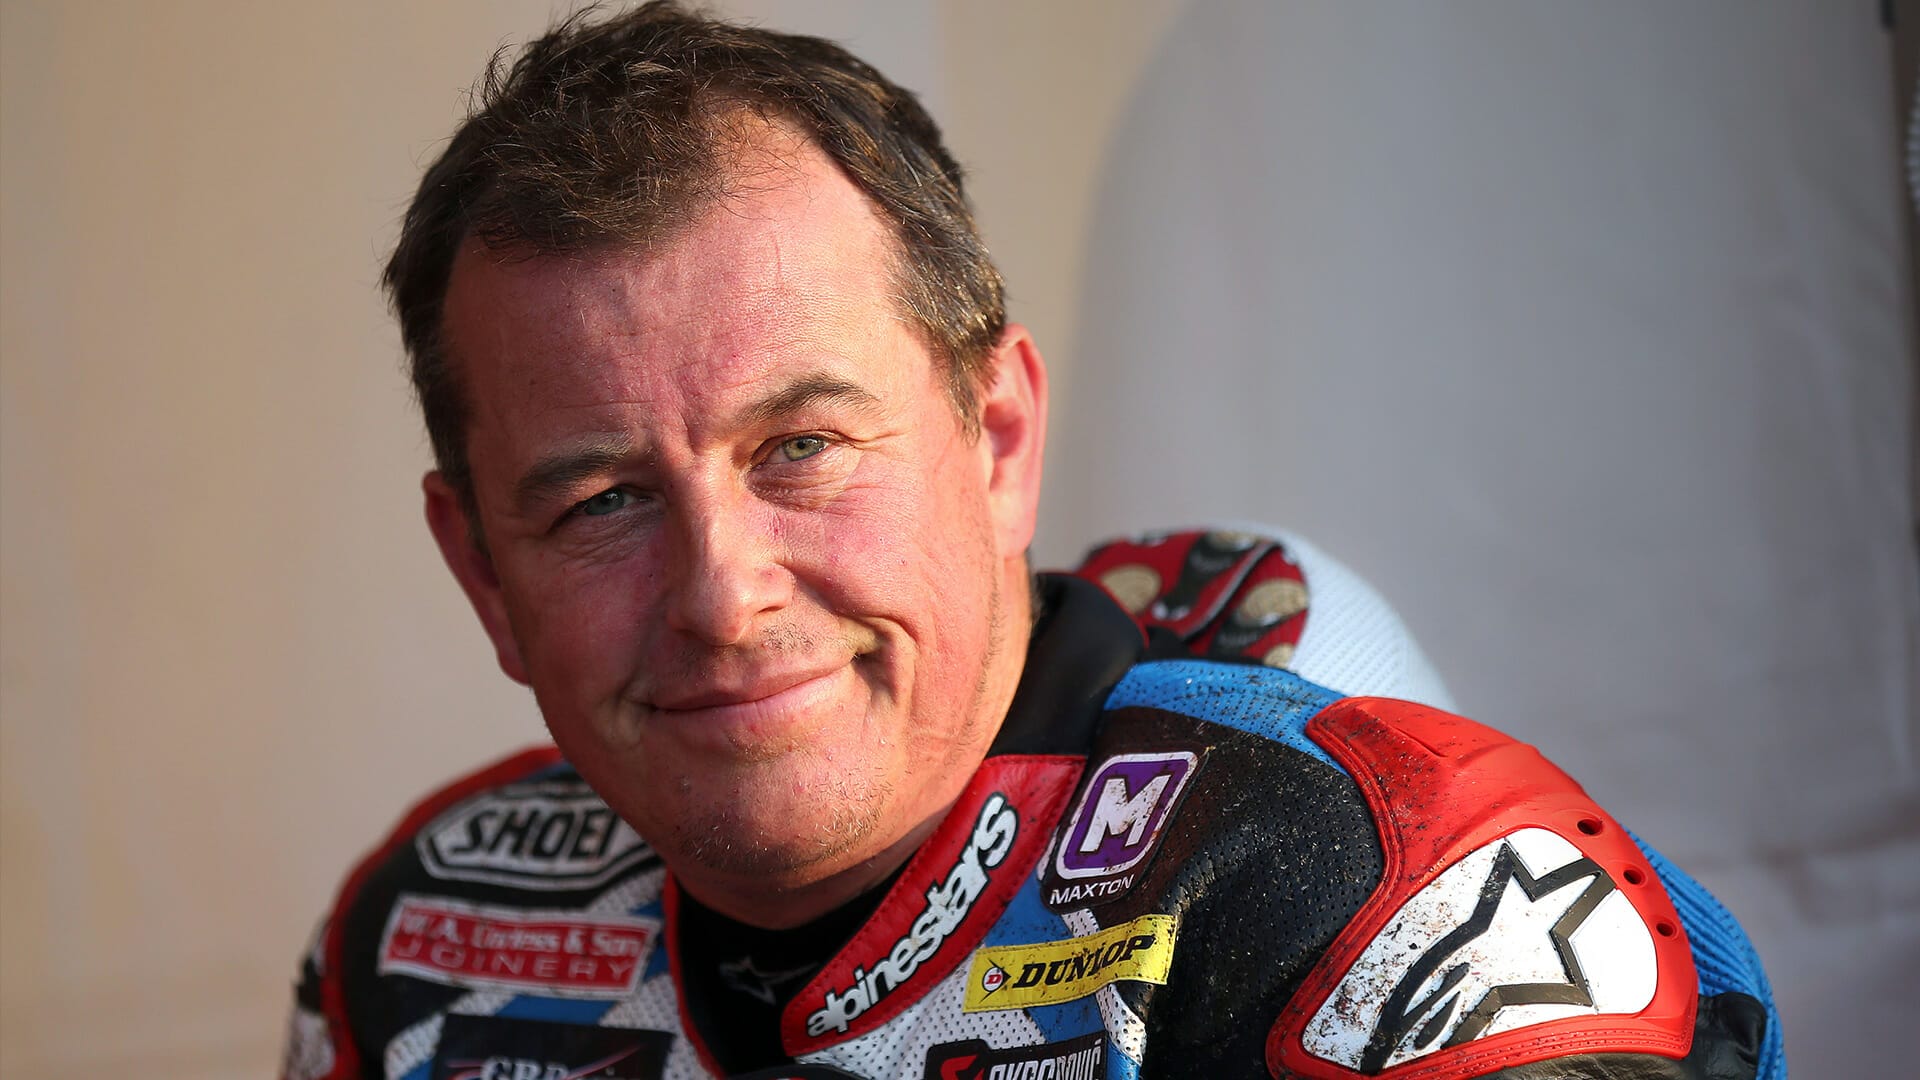 John McGuinness is appointed Member of the Order of the British Empire
- also in the MOTORCYCLES.NEWS APP